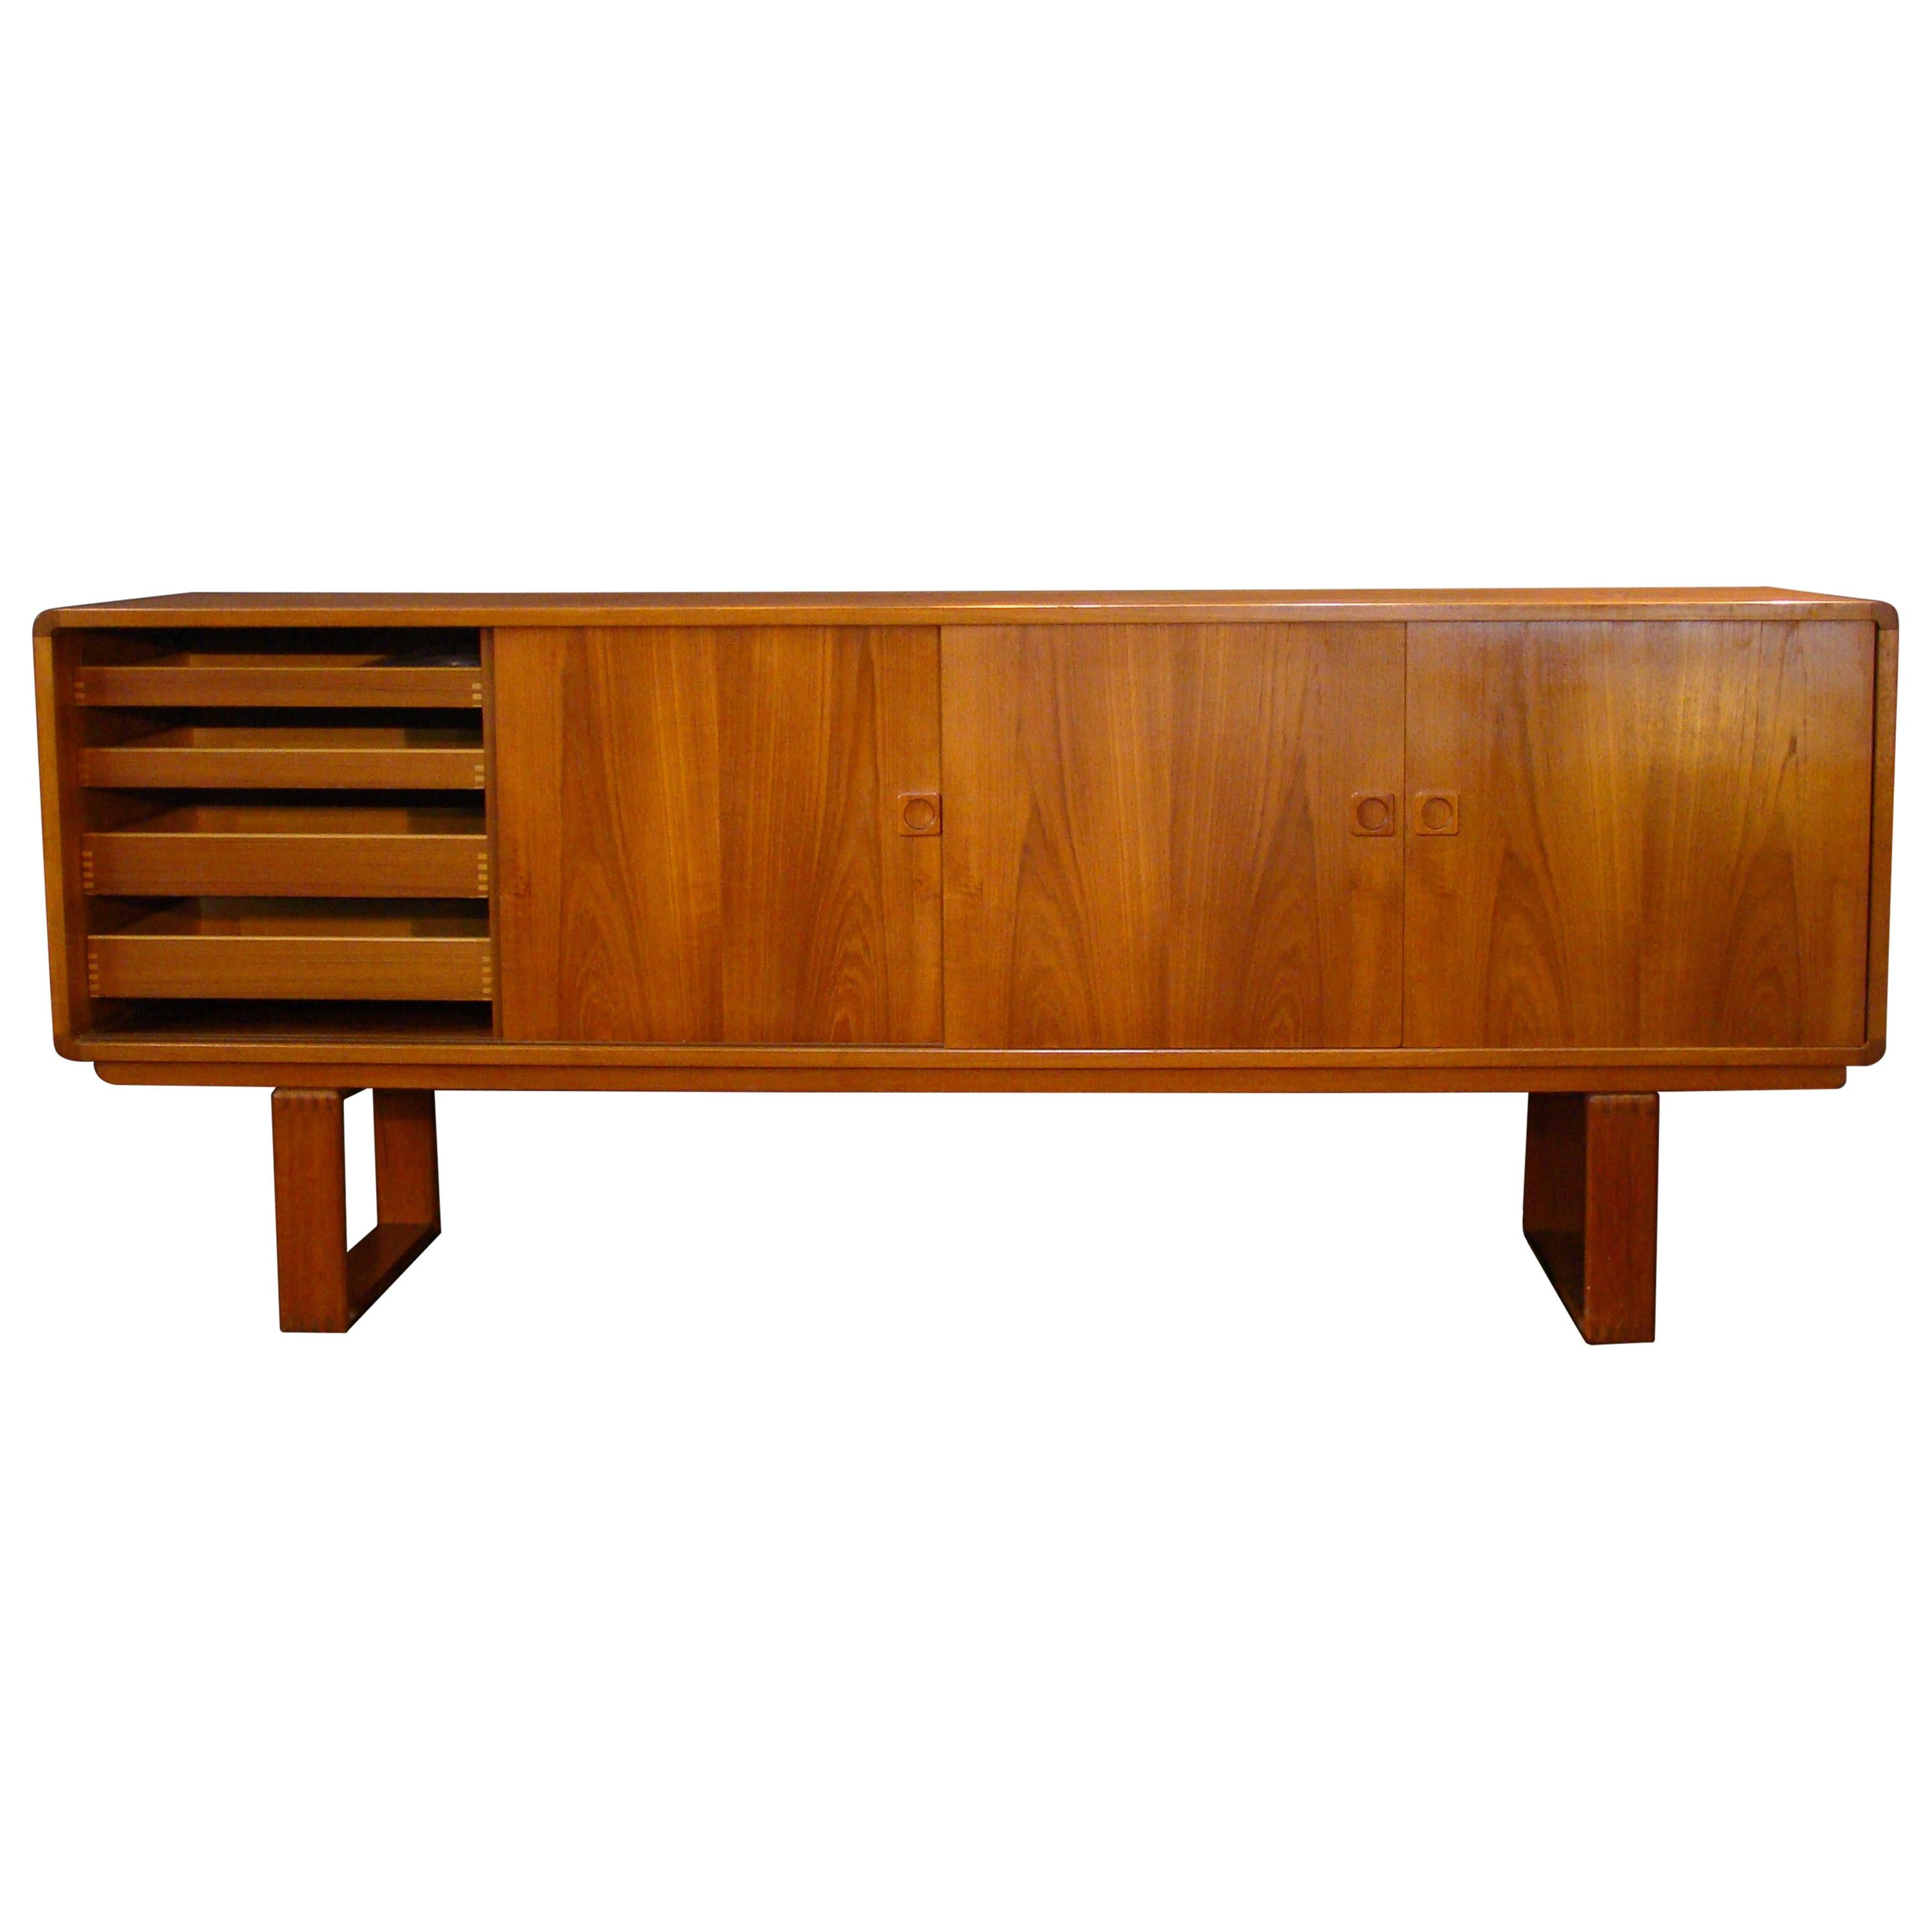 Danish Teak Credenza with Dovetailed Runners by Klausen and Son, circa 1969